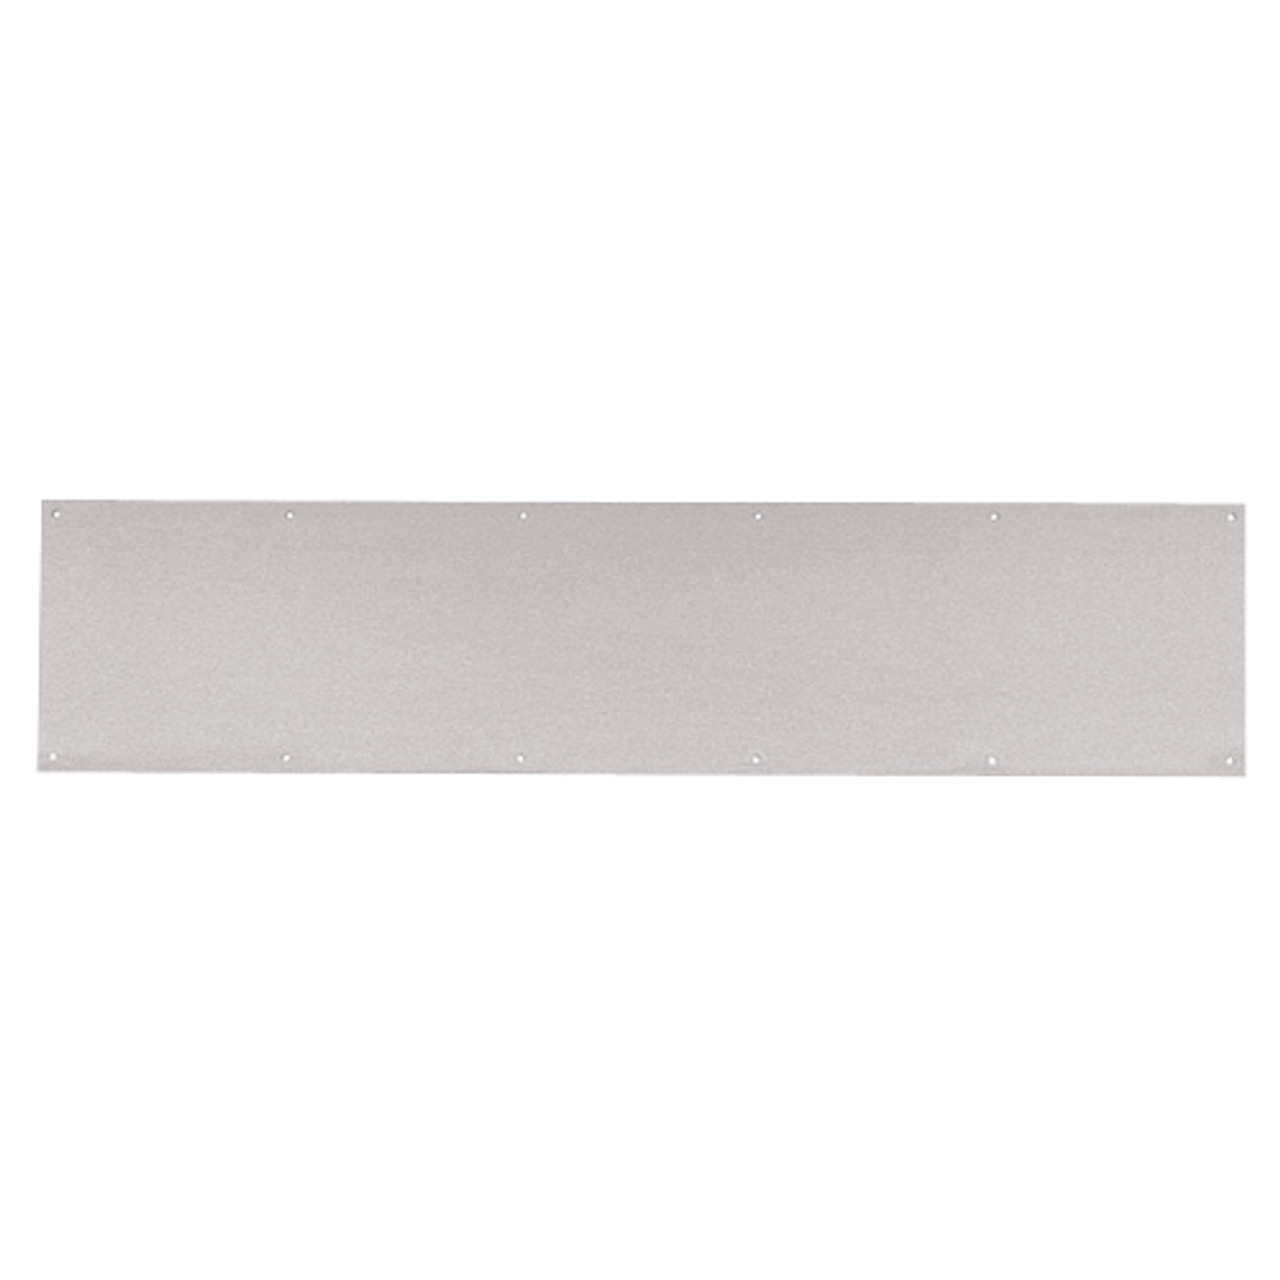 8400-US32D-9.5x46.5-B-CS Ives 8400 Series Protection Plate in Satin Stainless Steel